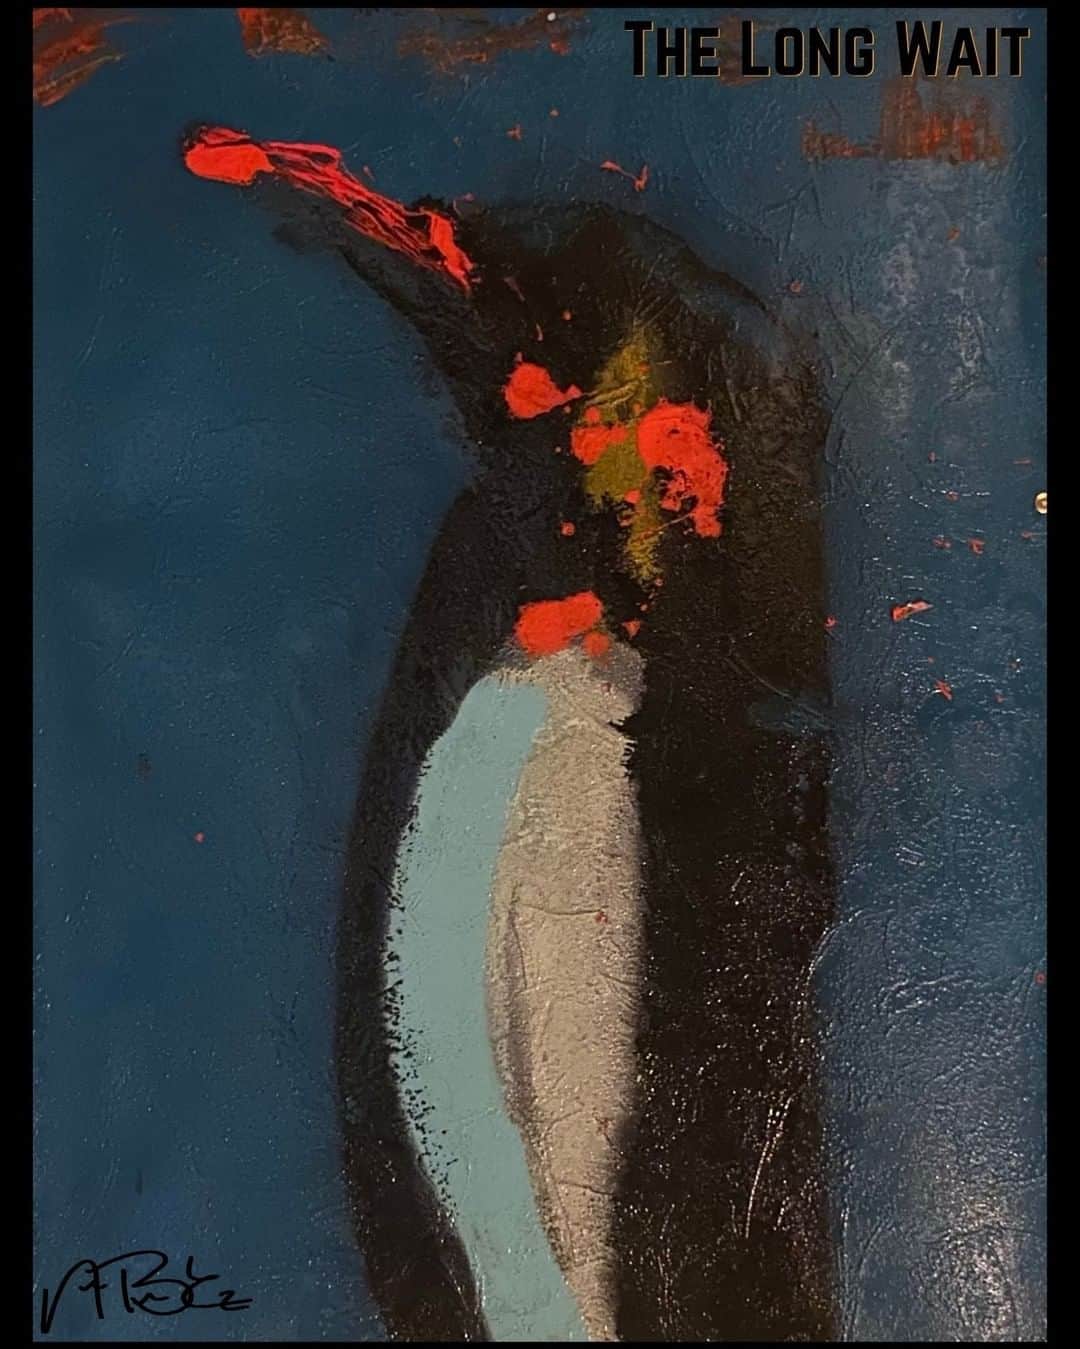 ニコラス・ブレンドンさんのインスタグラム写真 - (ニコラス・ブレンドンInstagram)「THE LONG WAIT: PART I / Post 2 of 2 (My bad penguin fic inspired by Nicky’s paintings -T)  Poe joined Penguin Strike Force One the minute she reached the line on the “You Must Be THIS Tall” to fly a jet sign at the recruiting office. While signing up, she came across two former flames named Hitchcock and Winger – twin military brats with similar reputations as trouble makers and a weakness for the ladies. That same weakness once inspired them to make separate attempt to “borrow” their dad’s jet to impress the young Poe. They quickly realized that Poe was not easy to impress, and also important to note, not “easy” either. In the end, all their little adventure accomplished was a quick trip to military boarding school and now a mandatory five-year hitch in Strike Force One.  The arrival of the twins was not going to impede on Poe’s plans in any way. If anything, she was excited about the opportunity to use them for her own nefarious purposes. She already had the drive to succeed in the force, but now there was just a little bit of added kick in her step knowing there was a more personal element to her grand destiny. And with that drive and determination, Poe quickly rose through the ranks to commander and was soon in charge of the castle guard. The perfect position to launch a coup…which is exactly what Poe did.  To be continued...  **Consider adopting one of these desperate intergalactic travelers. You may be their only hope to find a safe home.**  Next Installment: Ed Begley, Sr. Gangsta Gangsta Gold Ghost of Christmas Past How Do You Like Me Cow Night of the Living Bovine  #Penguins #OriginalArtwork #Fiction #AcrylicPainting #ArtForSale #Cows」7月6日 5時57分 - nicholasbrendon